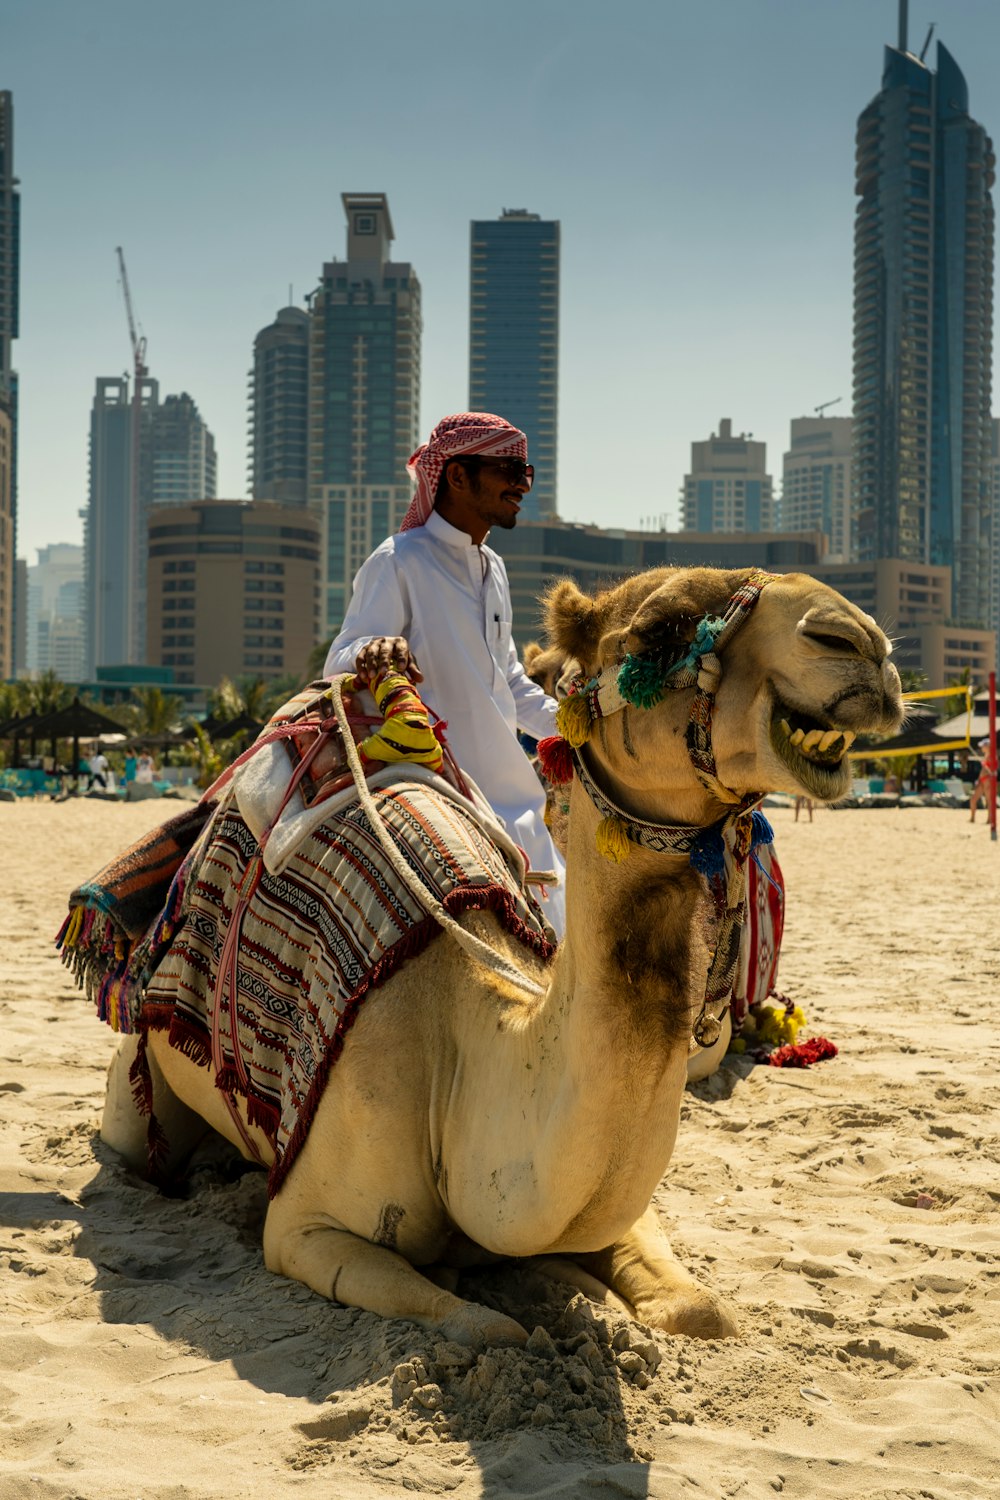 Woman in red and white hijab riding camel on brown sand during daytime  photo – Free Jumeirah beach - dubai - united arab emirates Image on Unsplash